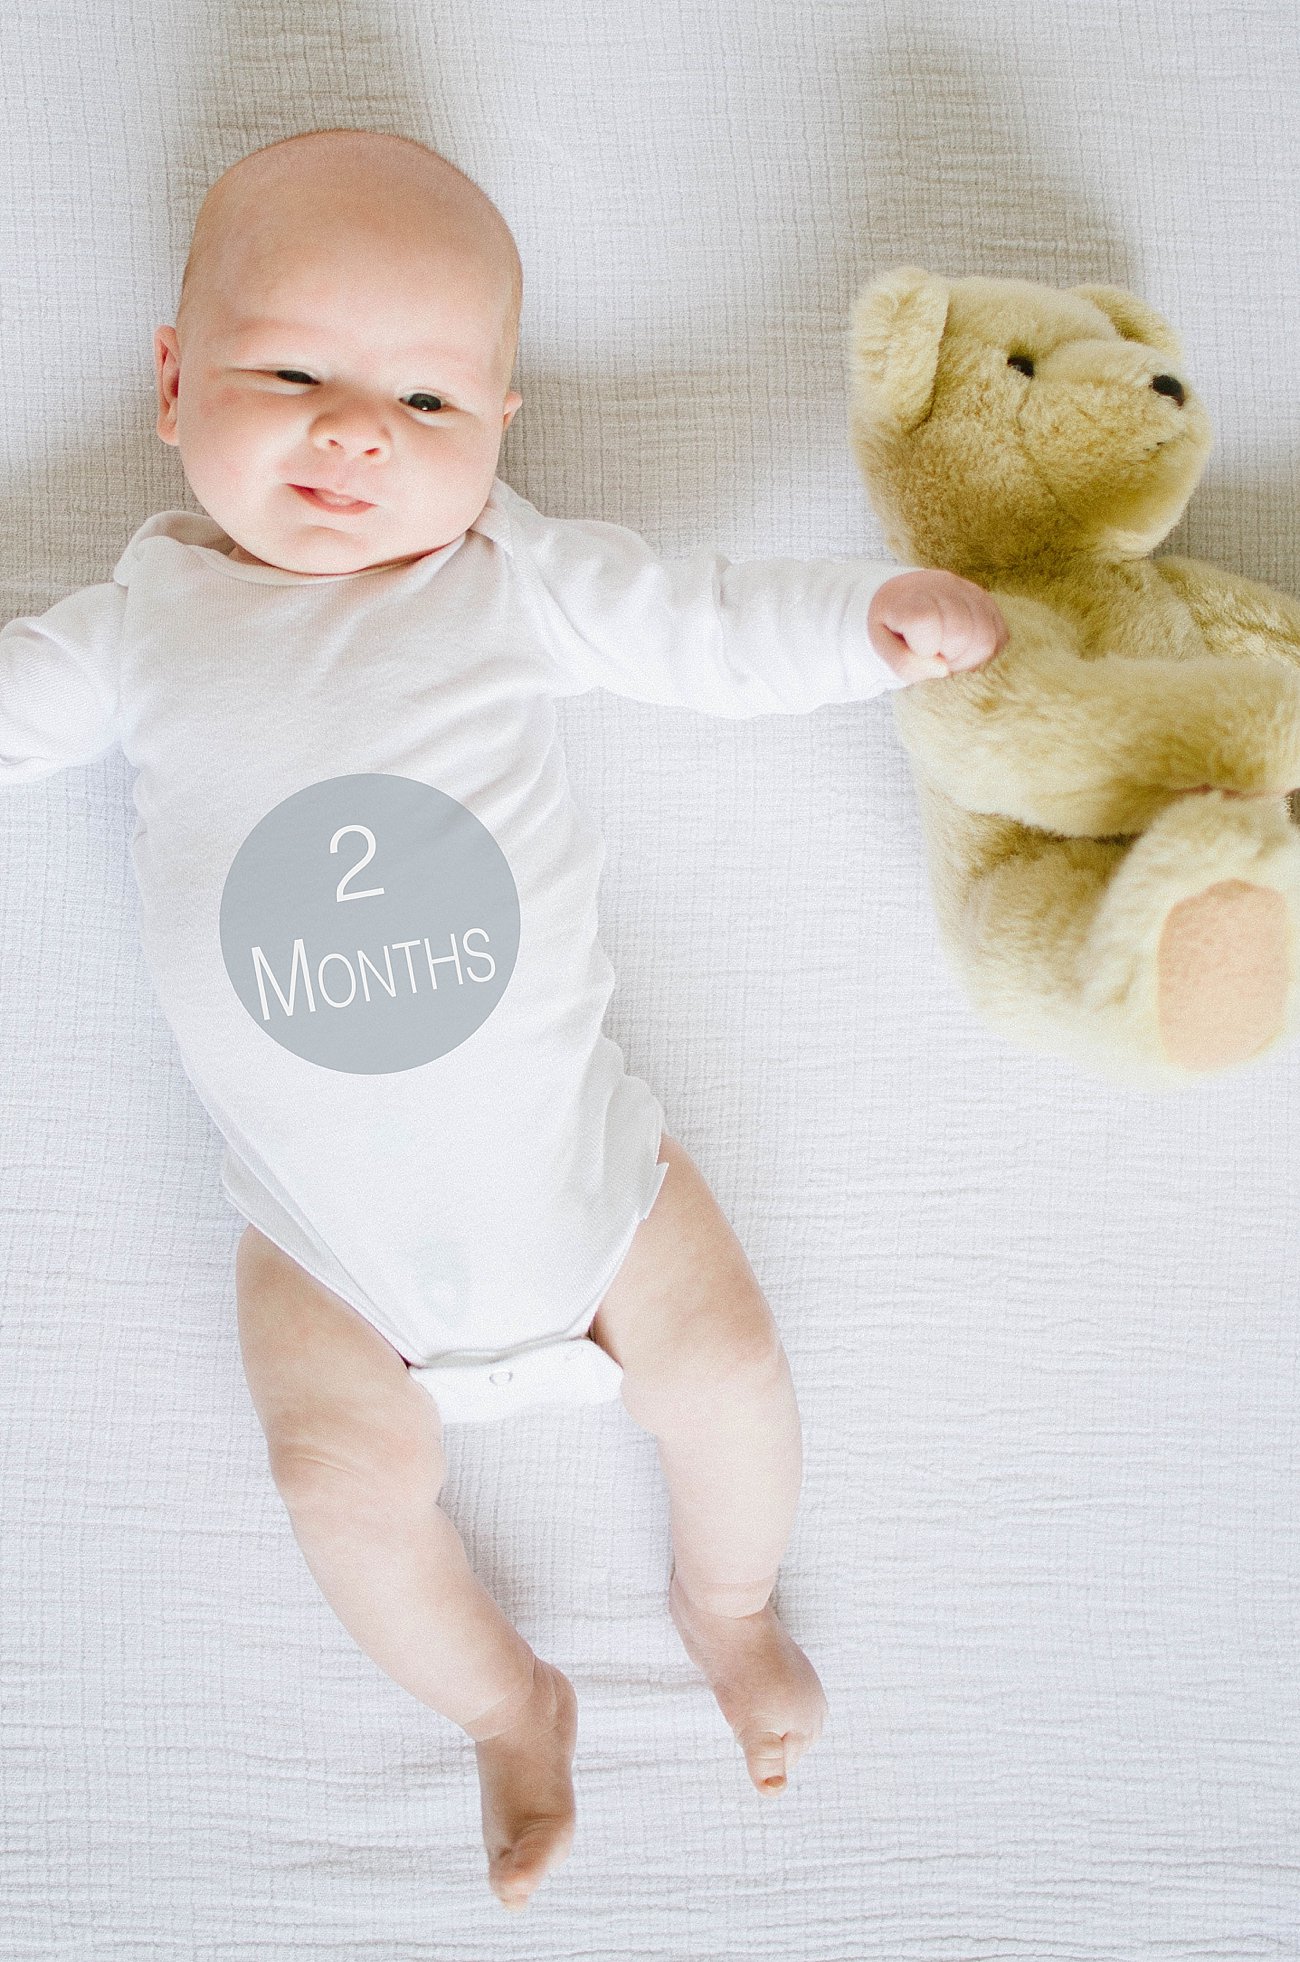 Amos James is Two Months Old (8)